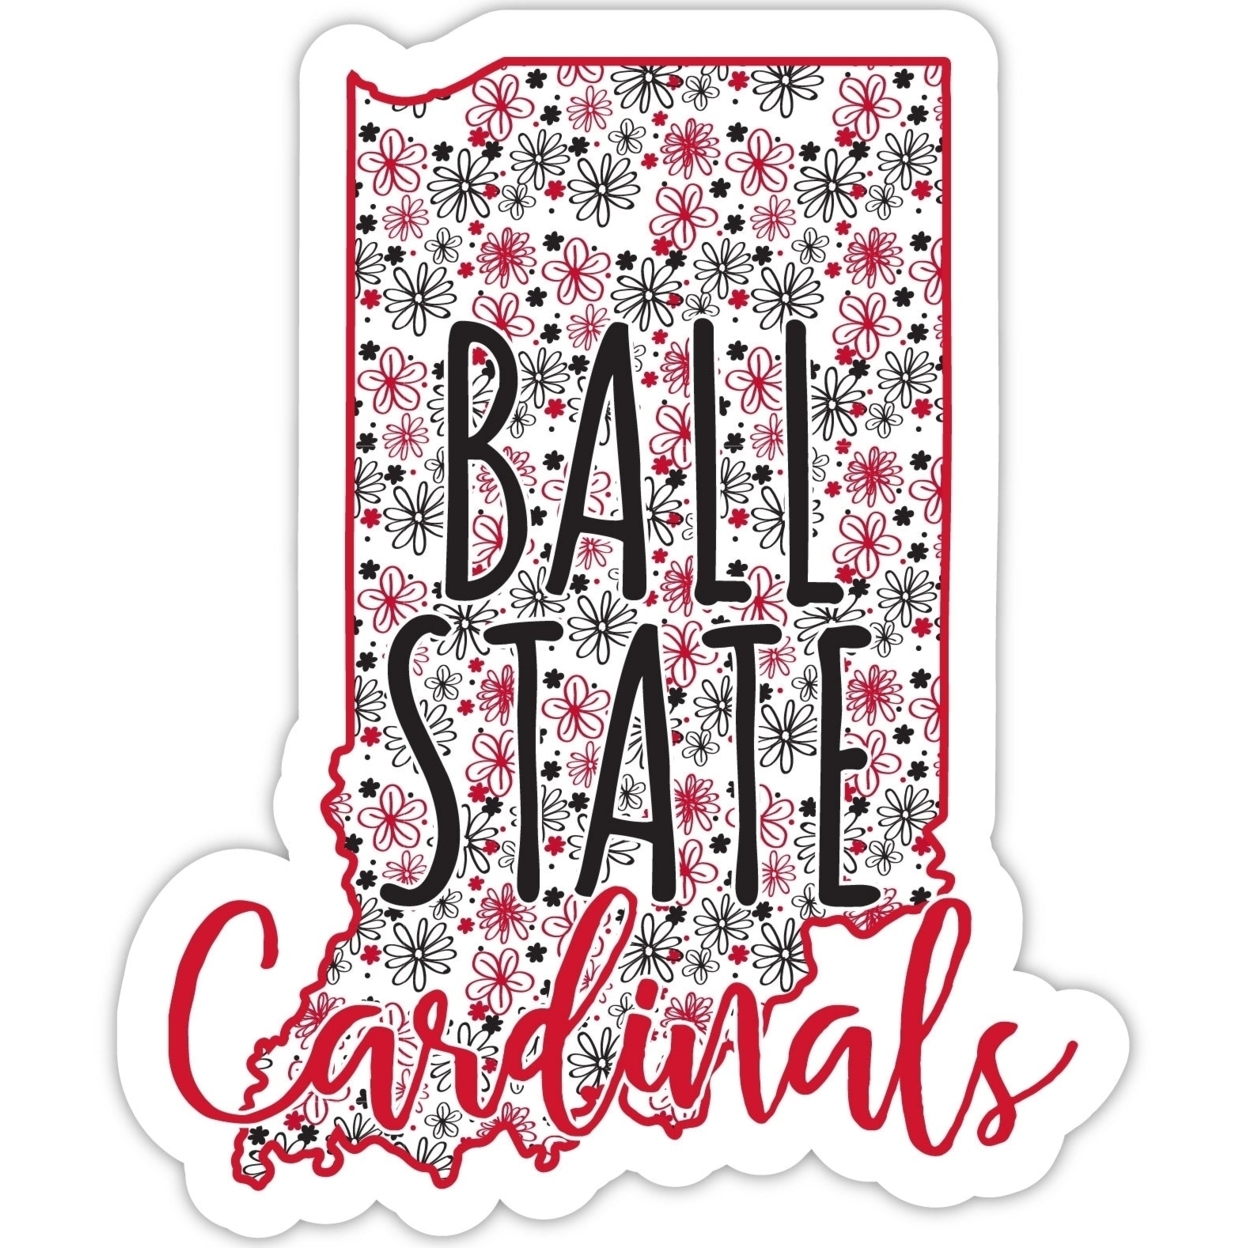 Ball State University Floral State Die Cut Decal 2-Inch